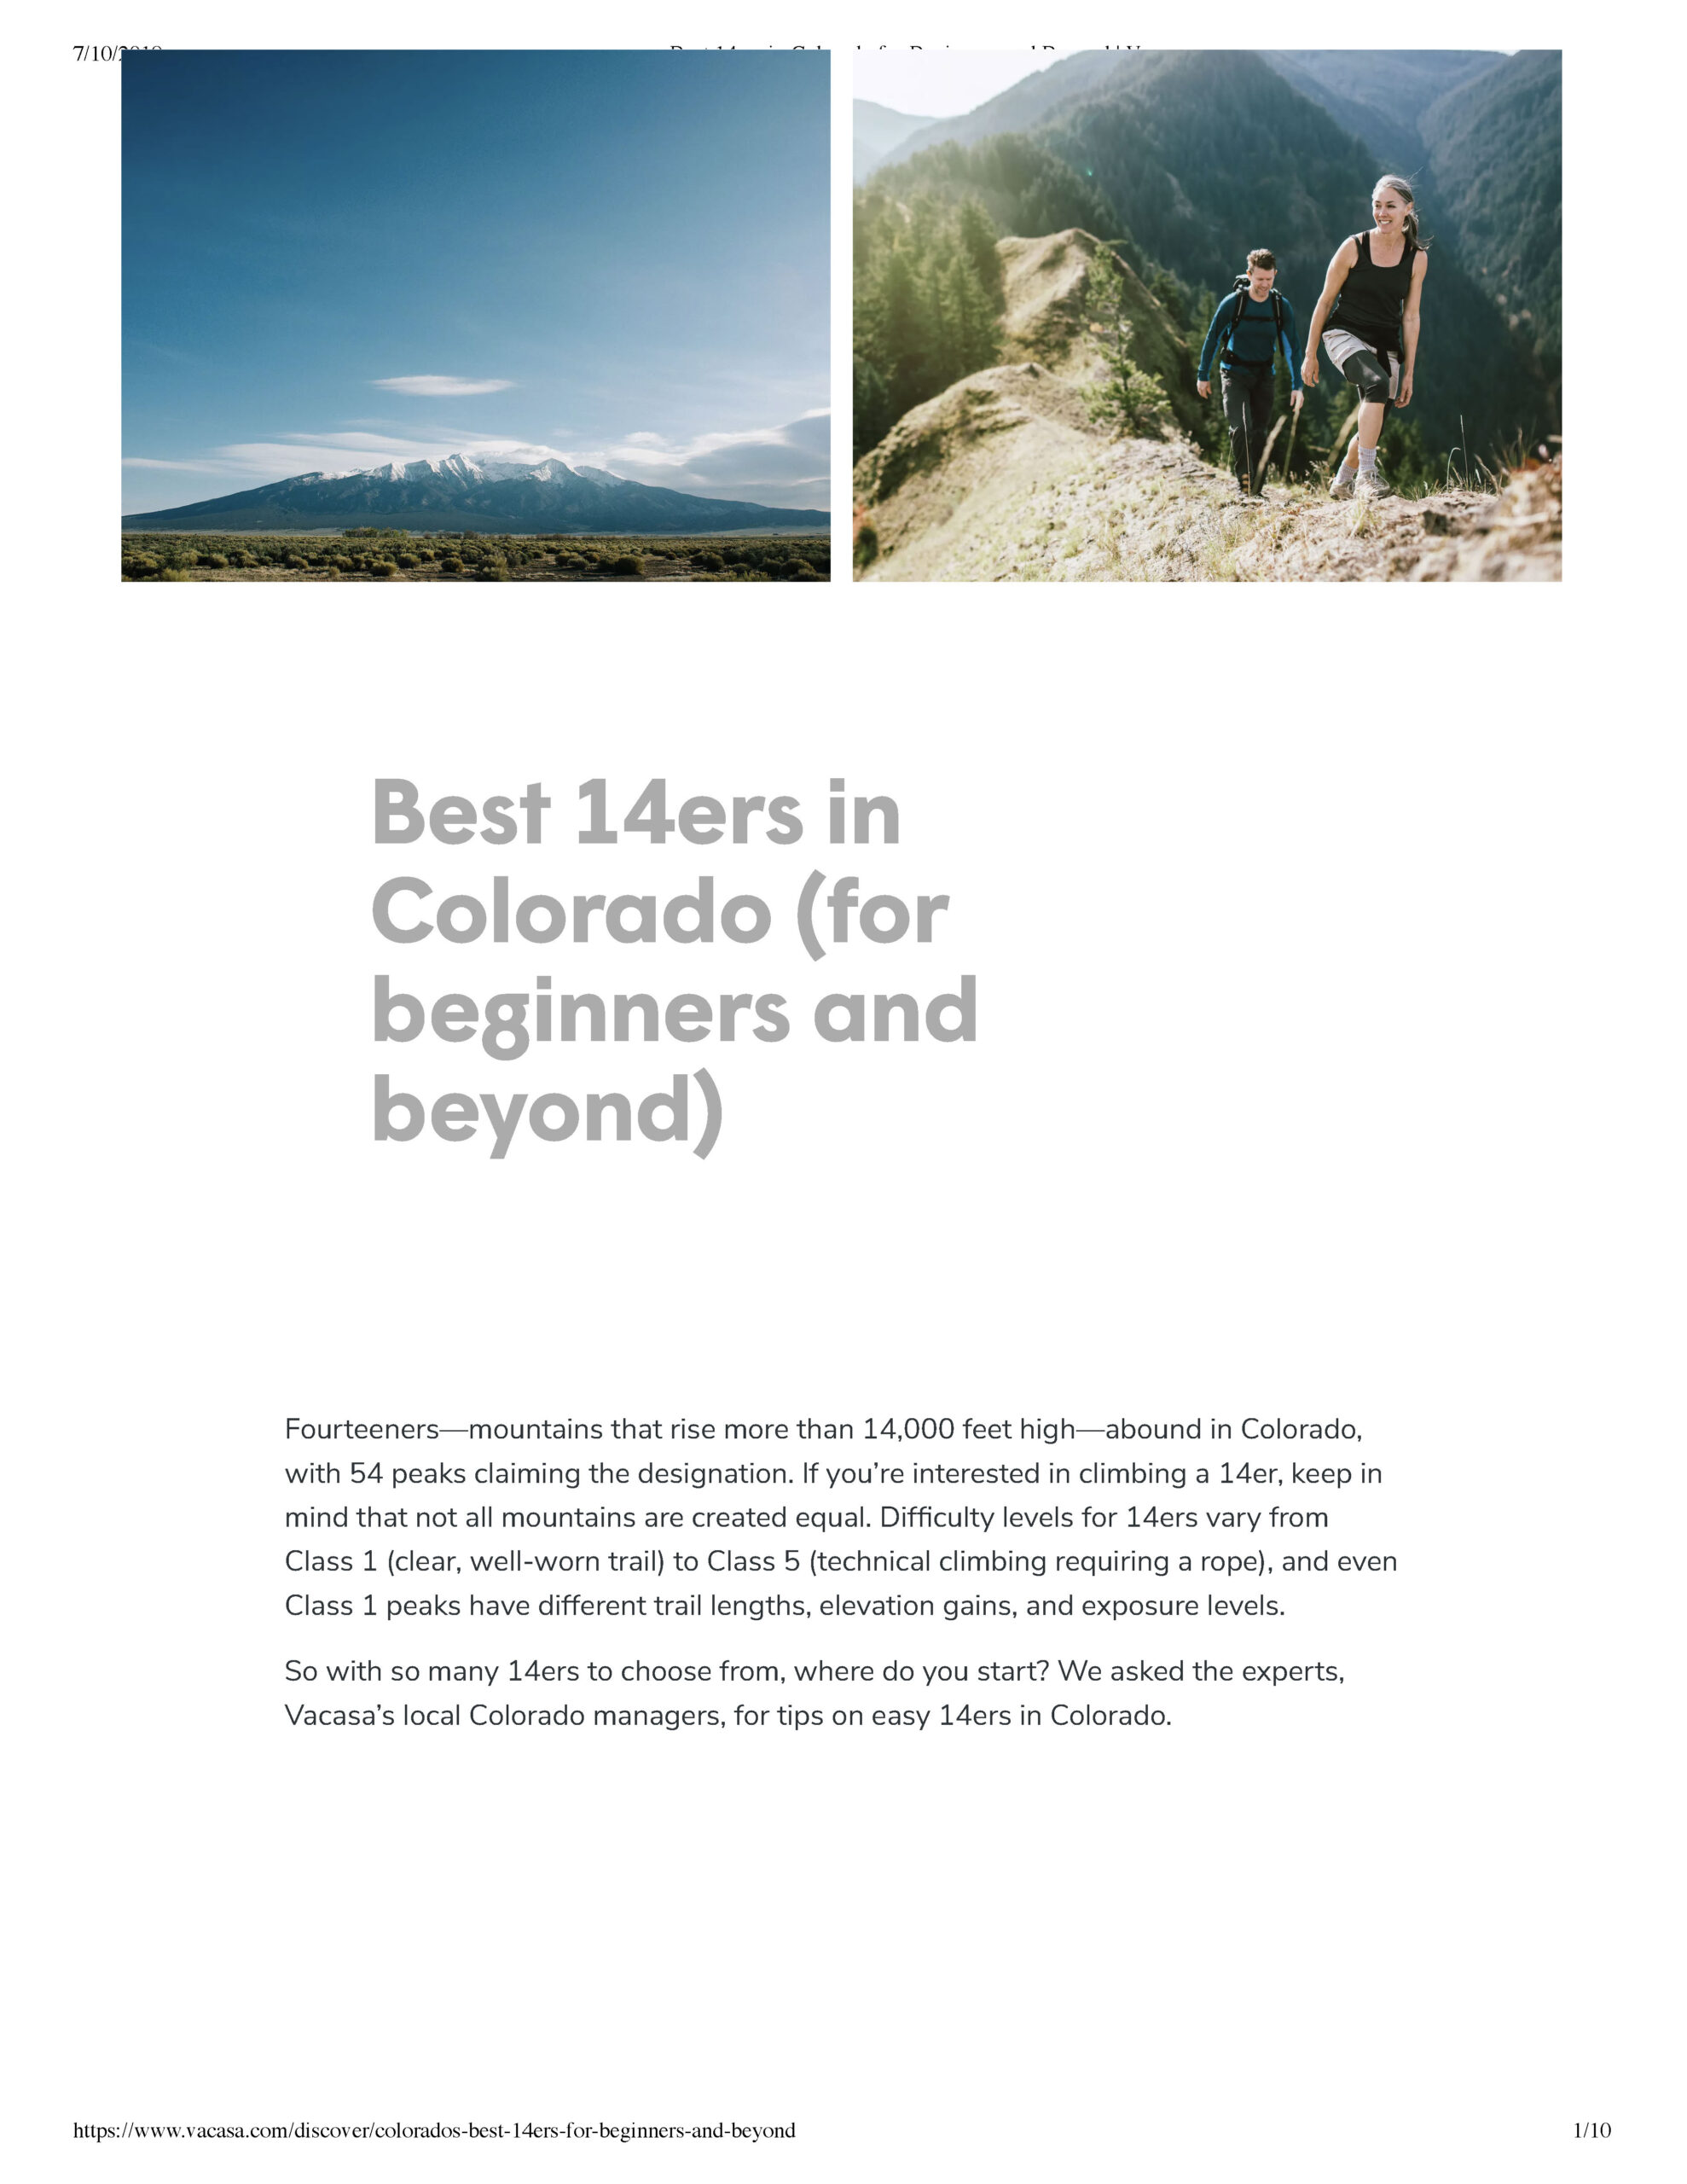 Blog Post: Best fourteeners in Colorado (for beginners and beyond)